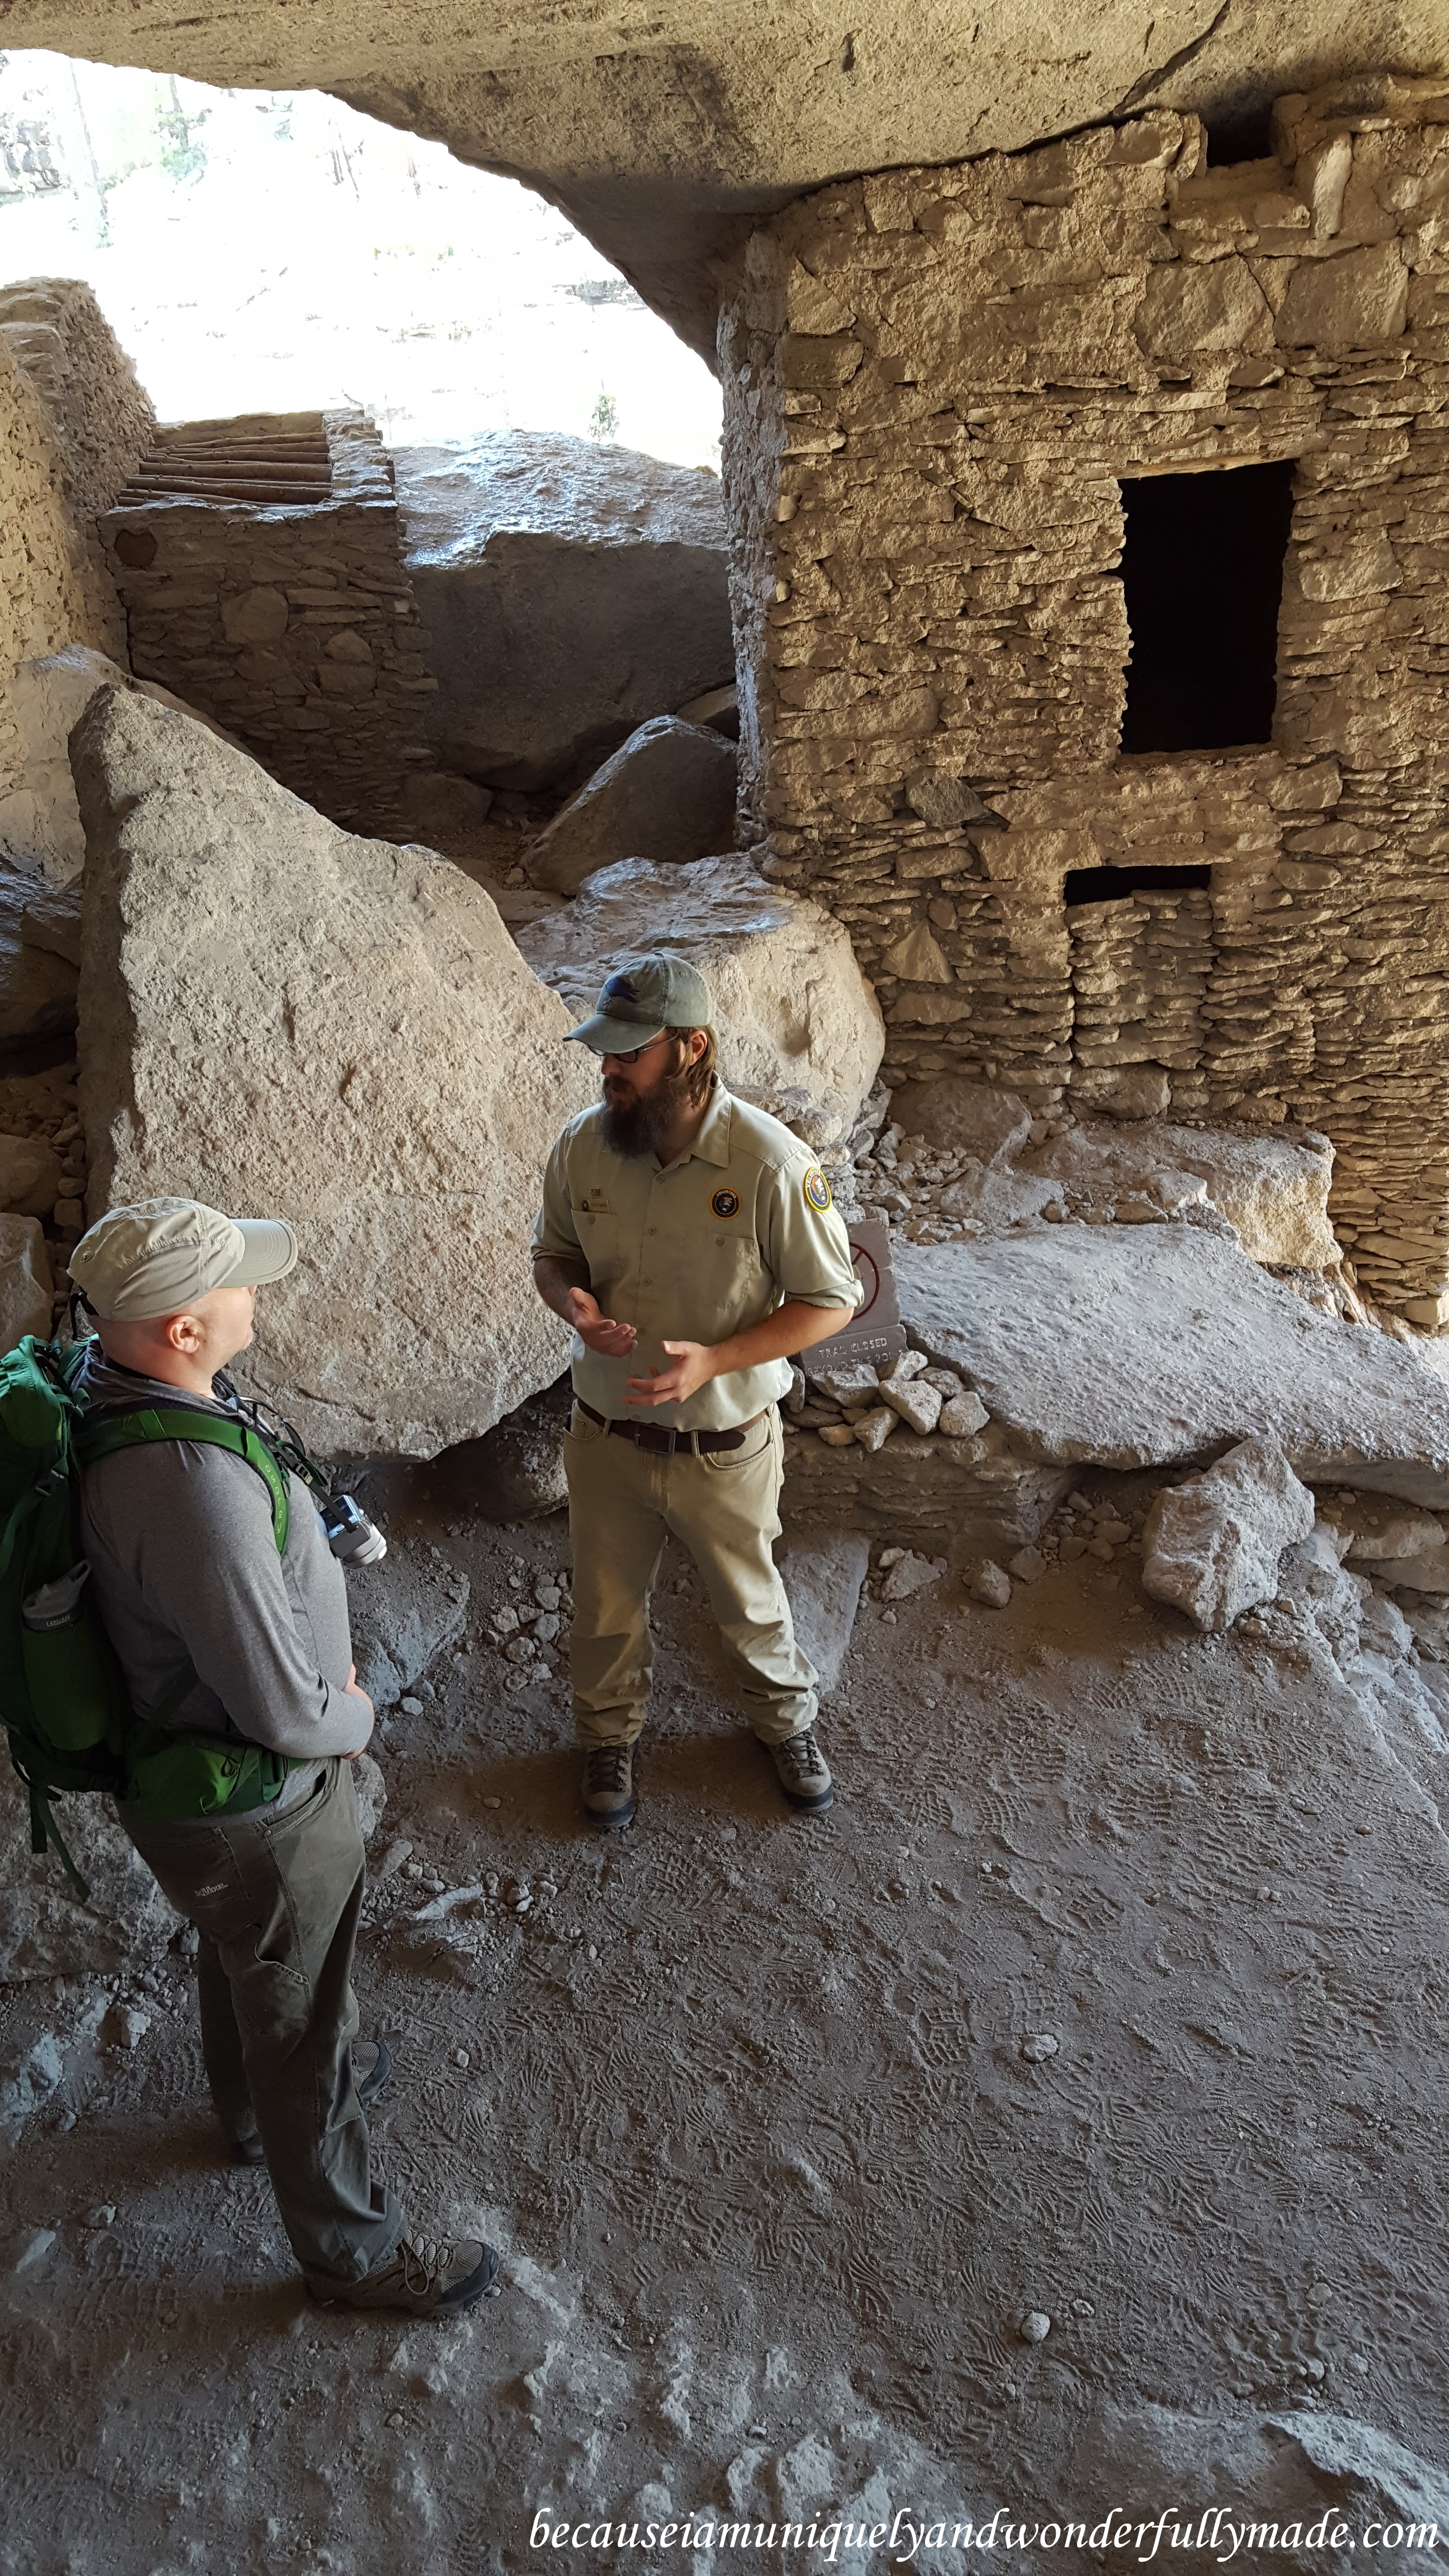 Enjoying a deep conversation with our park ranger at Gila Cliff Dwellings National Monument.